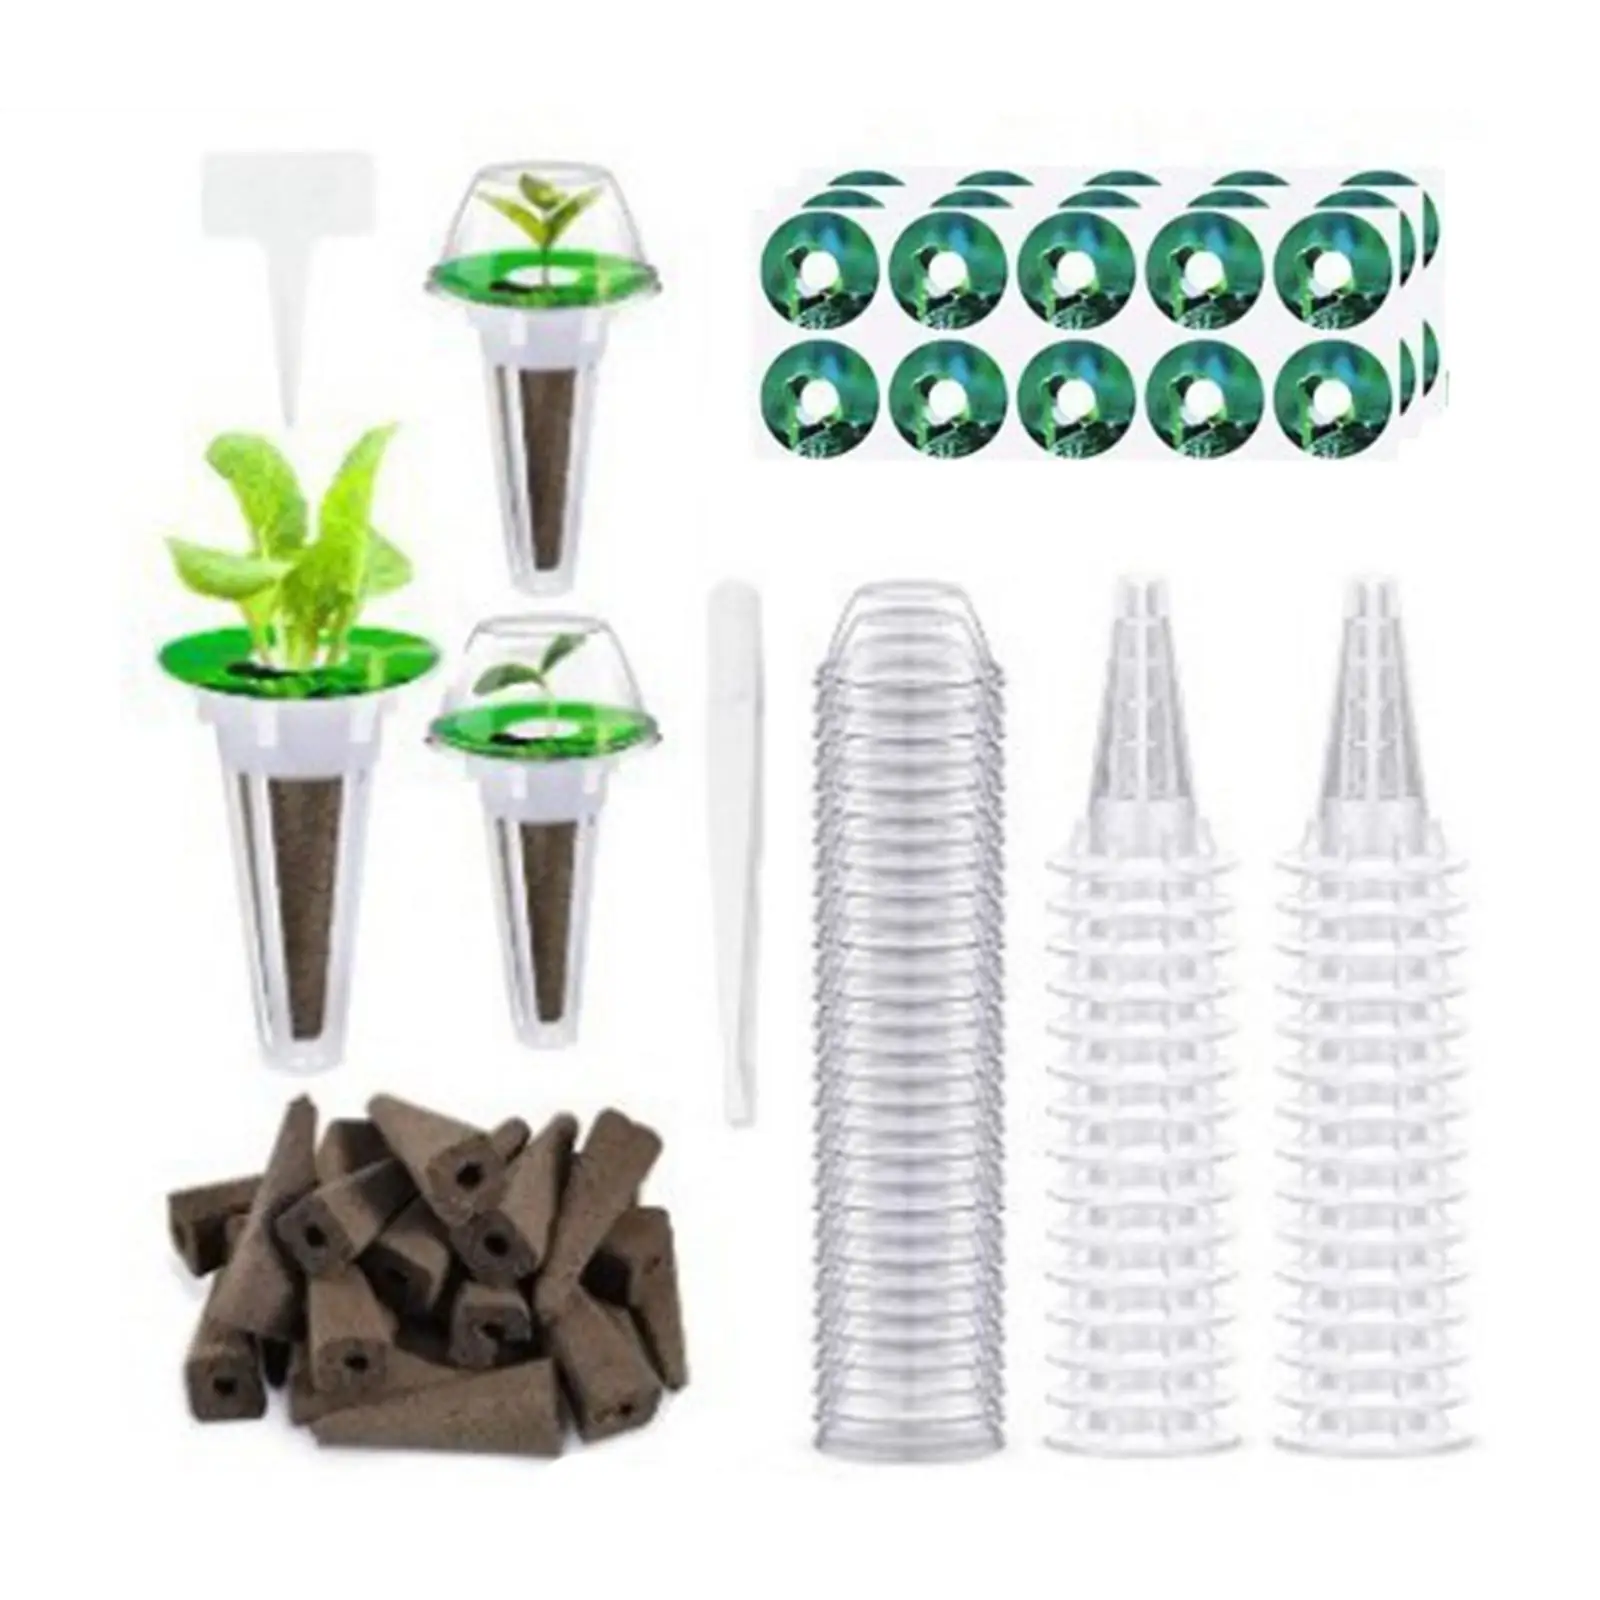 Hydroponics Mesh Net Cups Replacement Containers 24 Piece Set Slotted Mesh Net Garden Slotted Cups for Orchids Aquaponics Garden